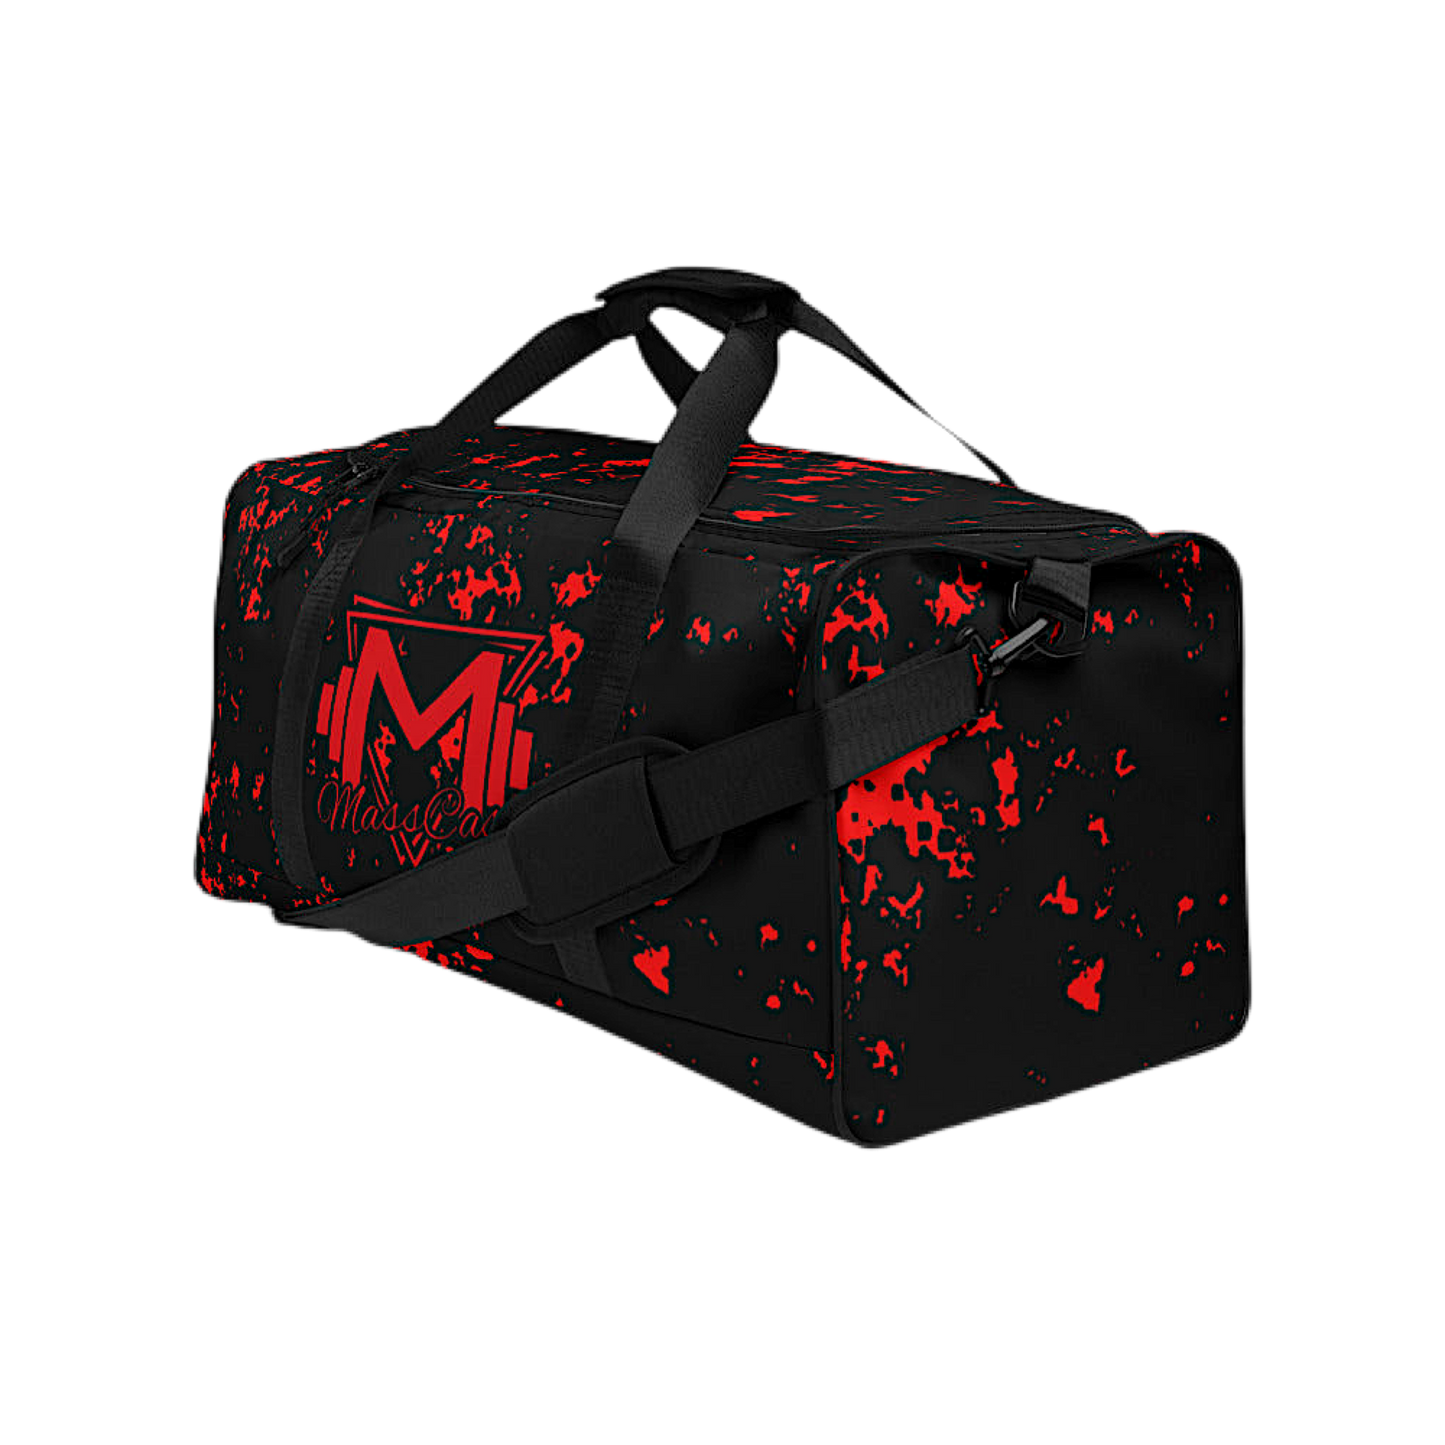 Coming For Blood Mass Cast Duffle bag